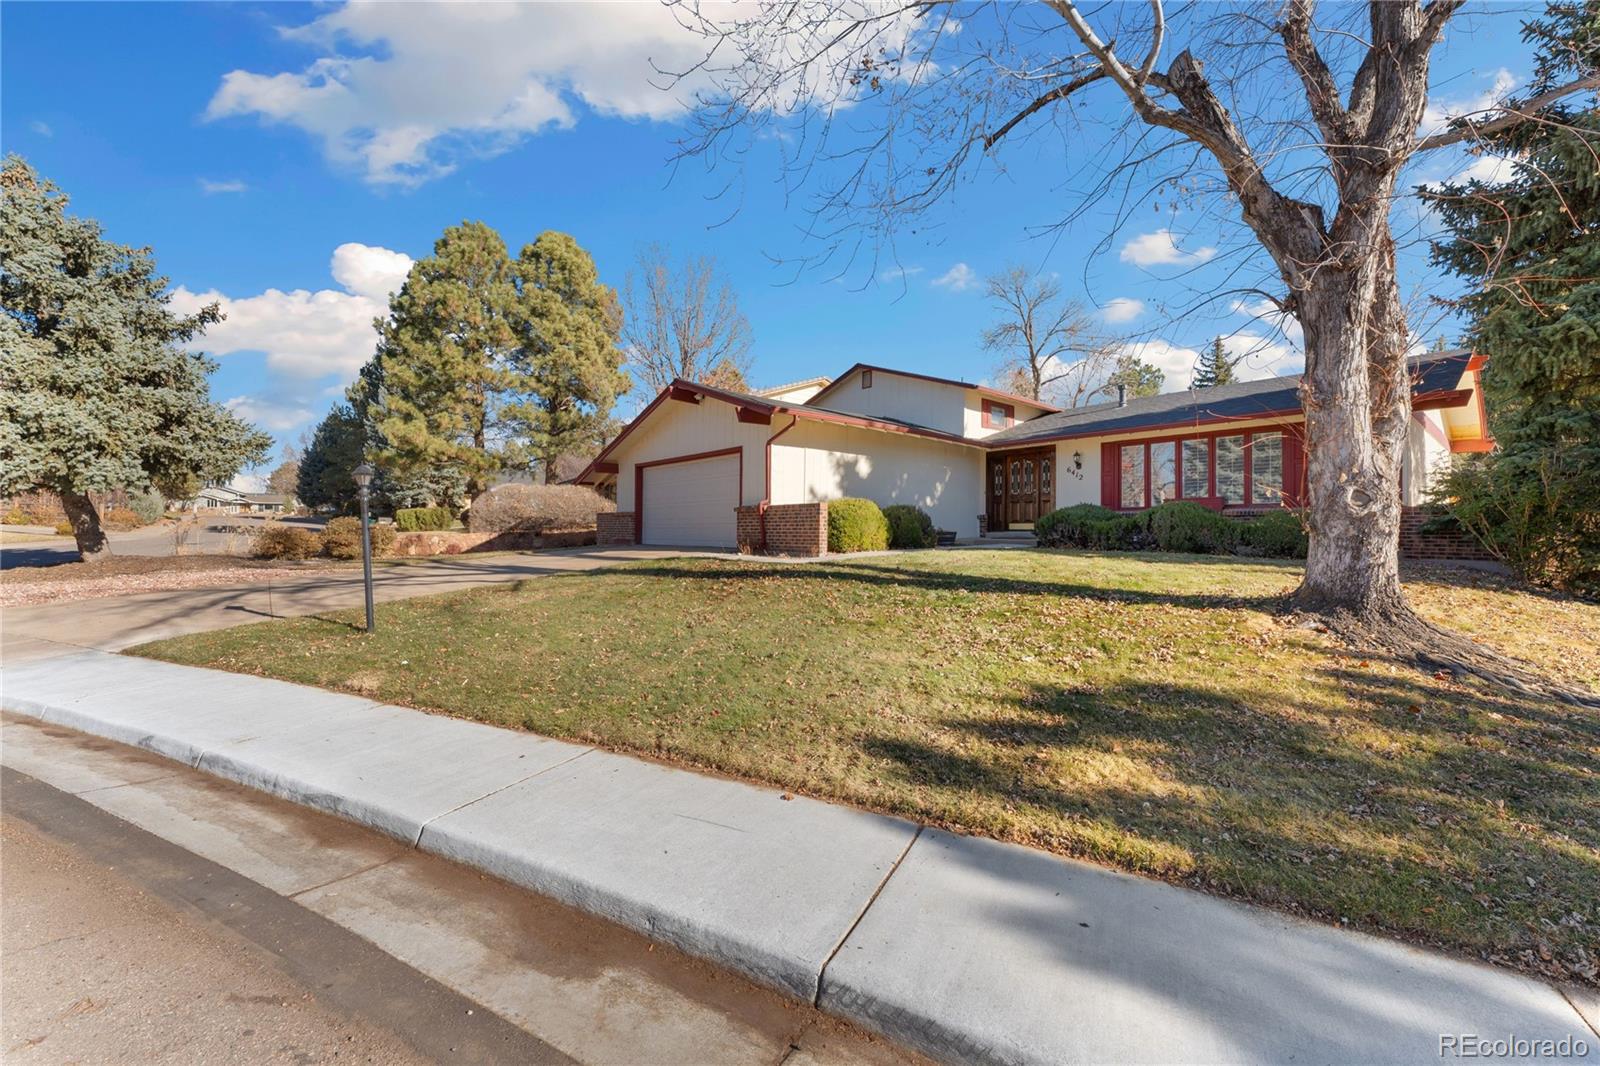 Report Image for 6412 S Heritage Place,Centennial, Colorado